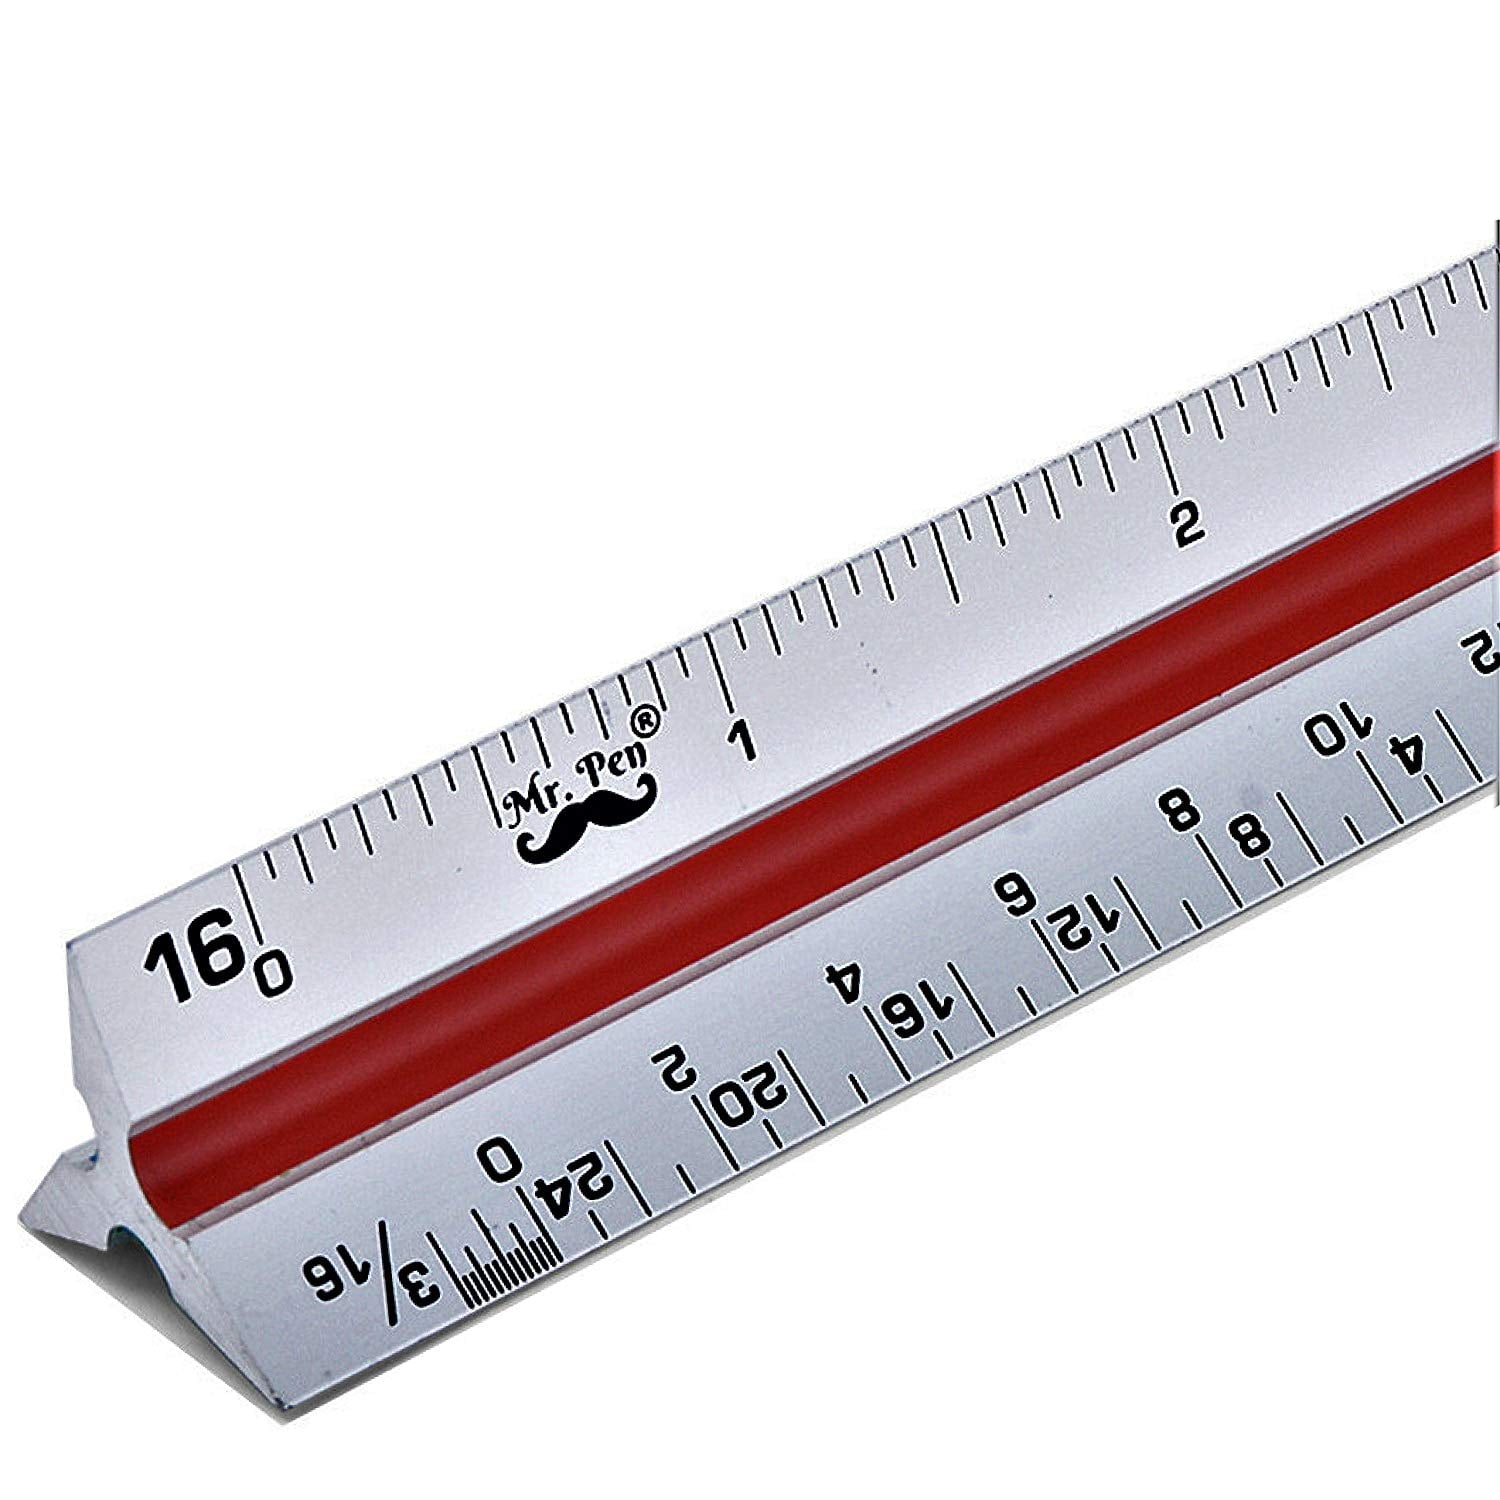 aluminum rulers professional blueprint for ruler straight beveled edge ruler red 12 mm and 300 inch architectural scale ruler 